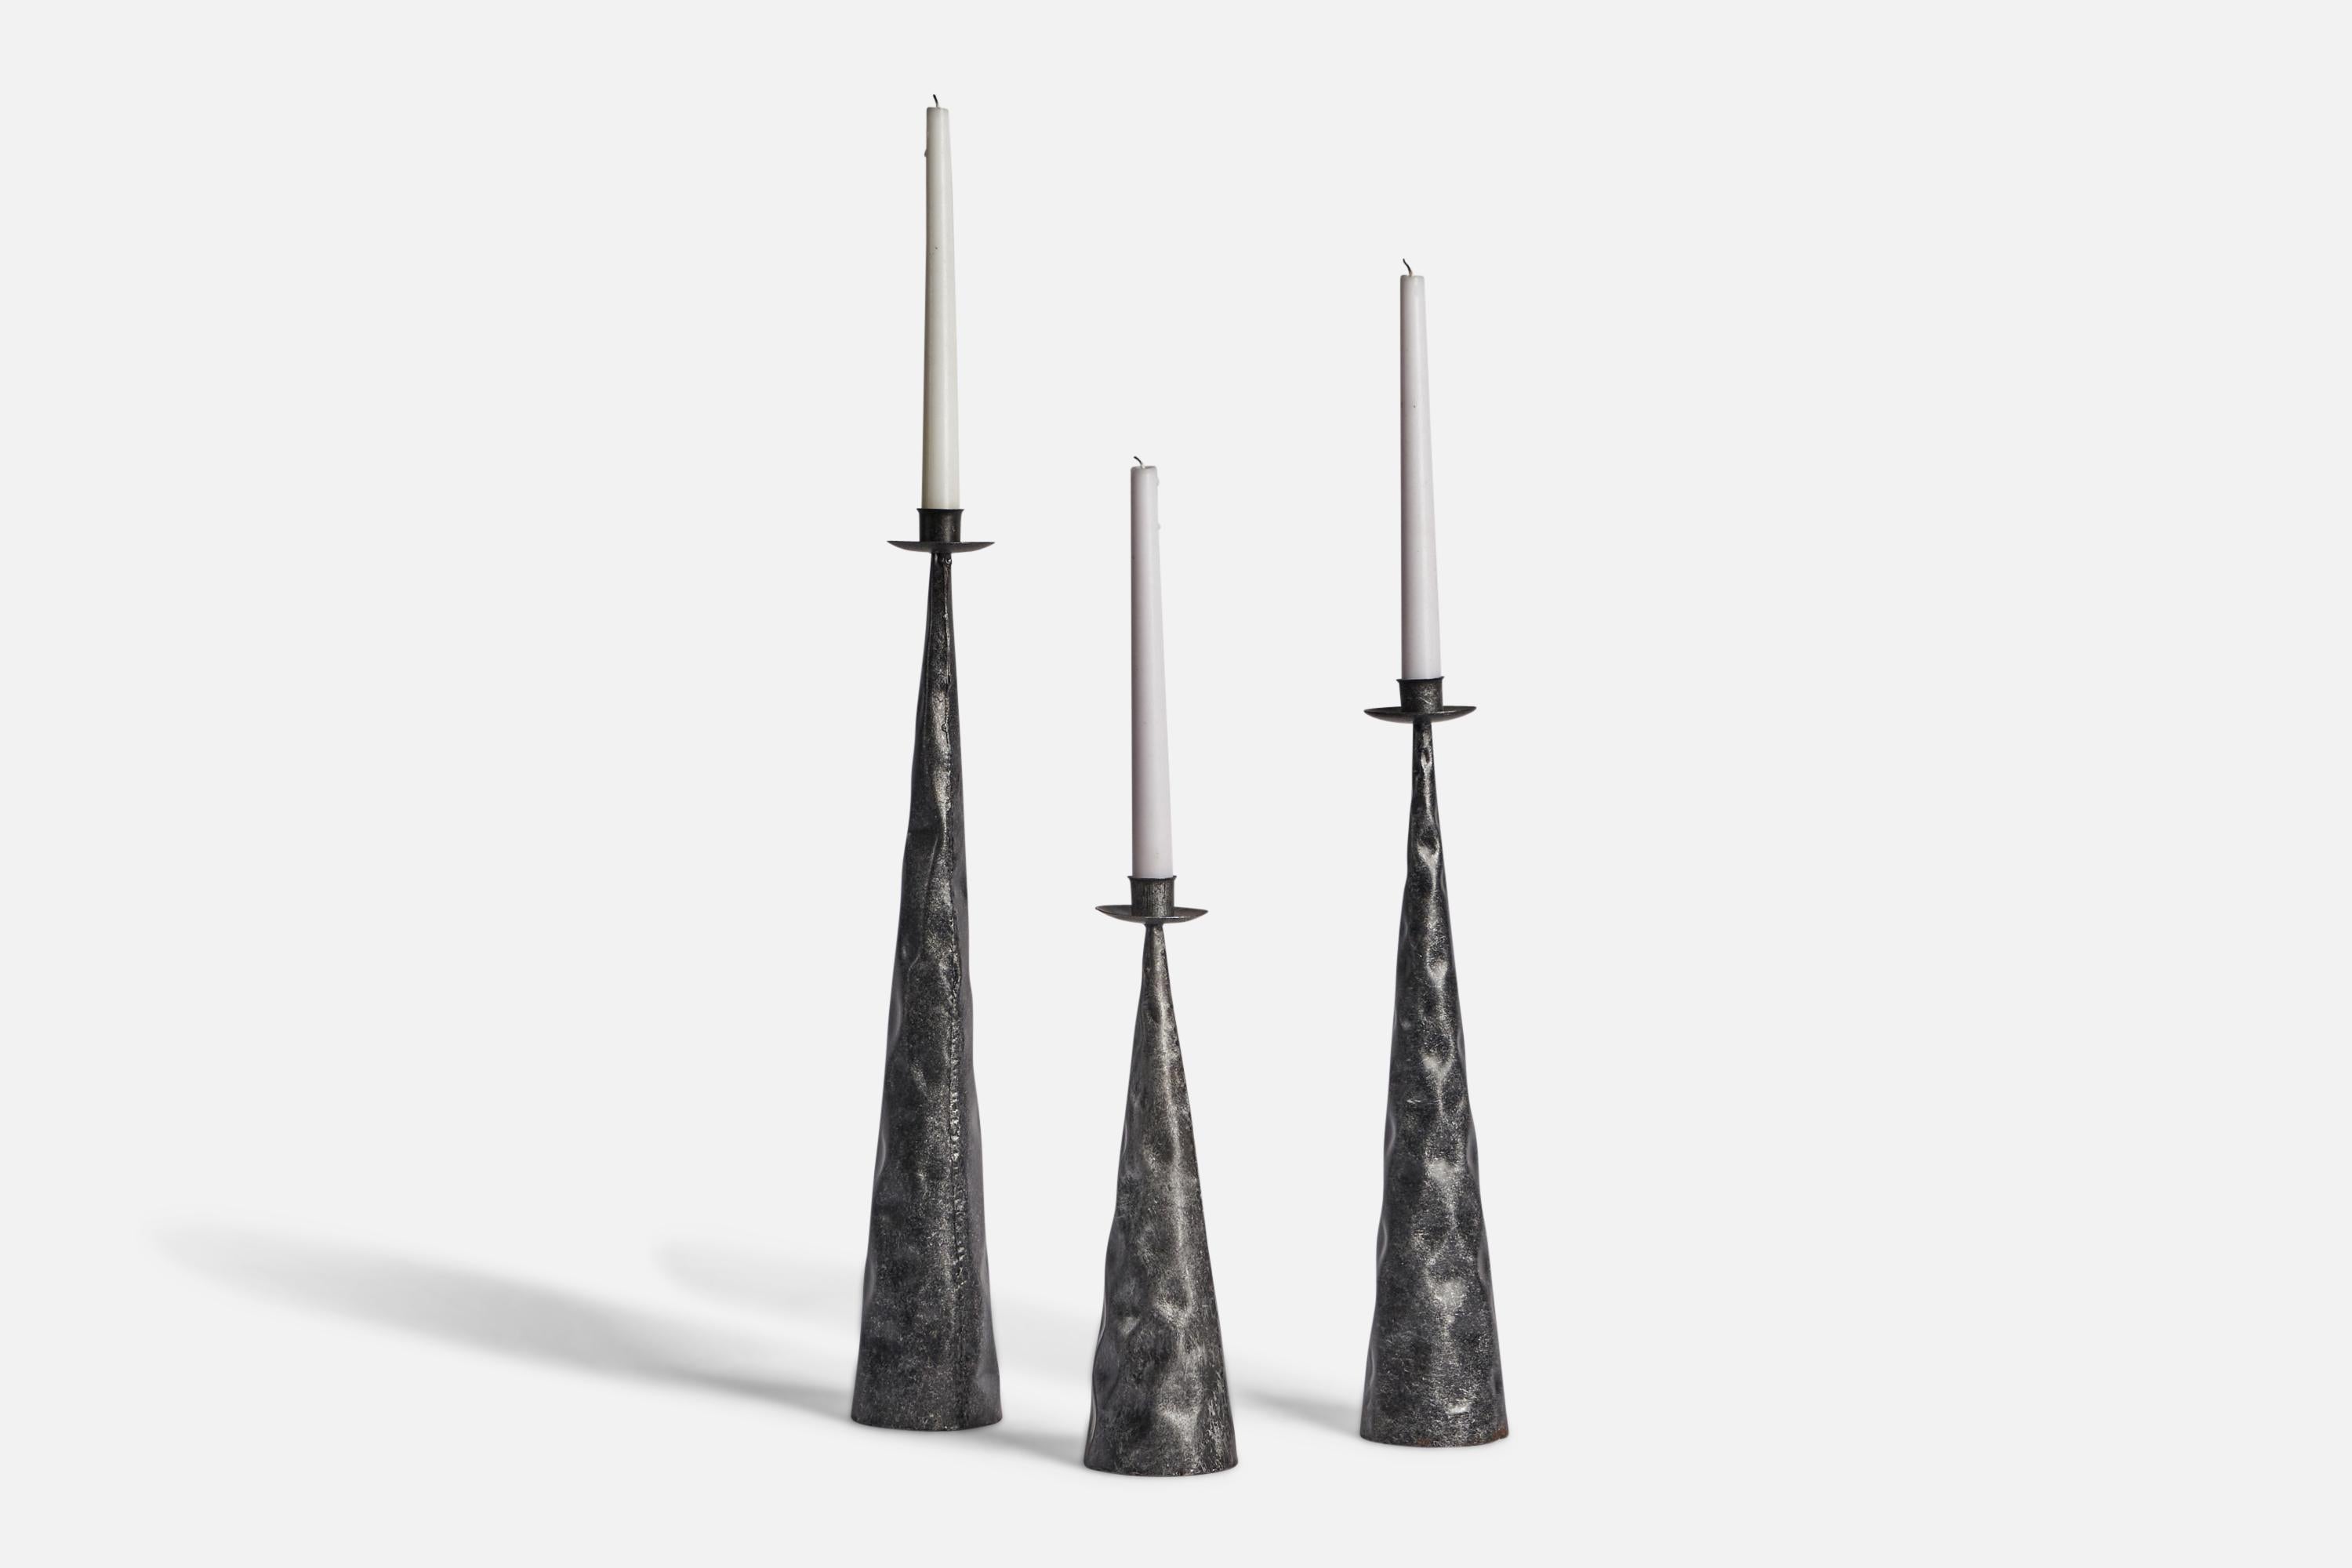 A set of three hammered iron candlesticks designed and produced in Sweden, c. 1970s.

Holds 0.8” diameter candles. Set of 3. 
Tallest candle holder: 19.25” height
Medium candle holder: 16” height
Short candle holder: 12” height 
All have base